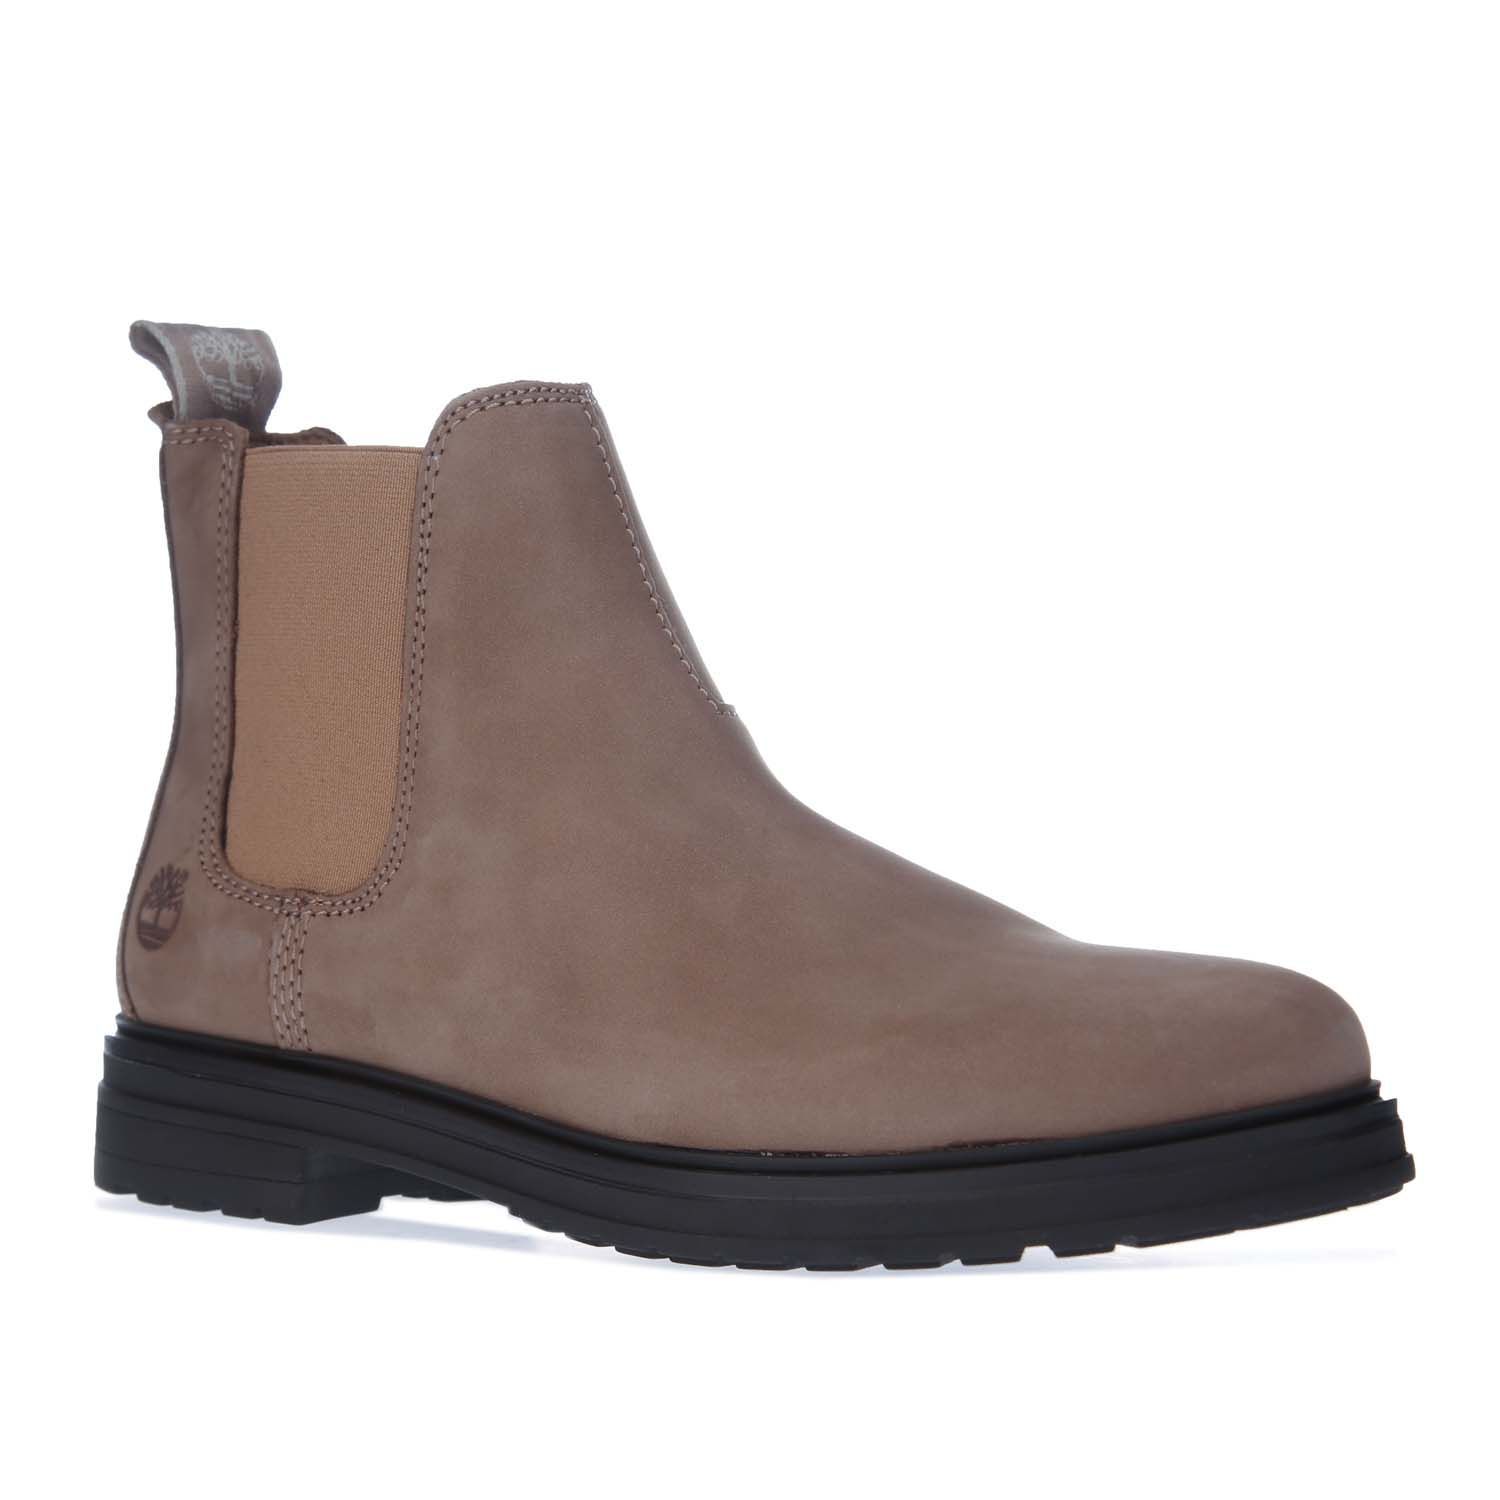 Timberland Hannover Hill Chelsea boots voor dames, taupe